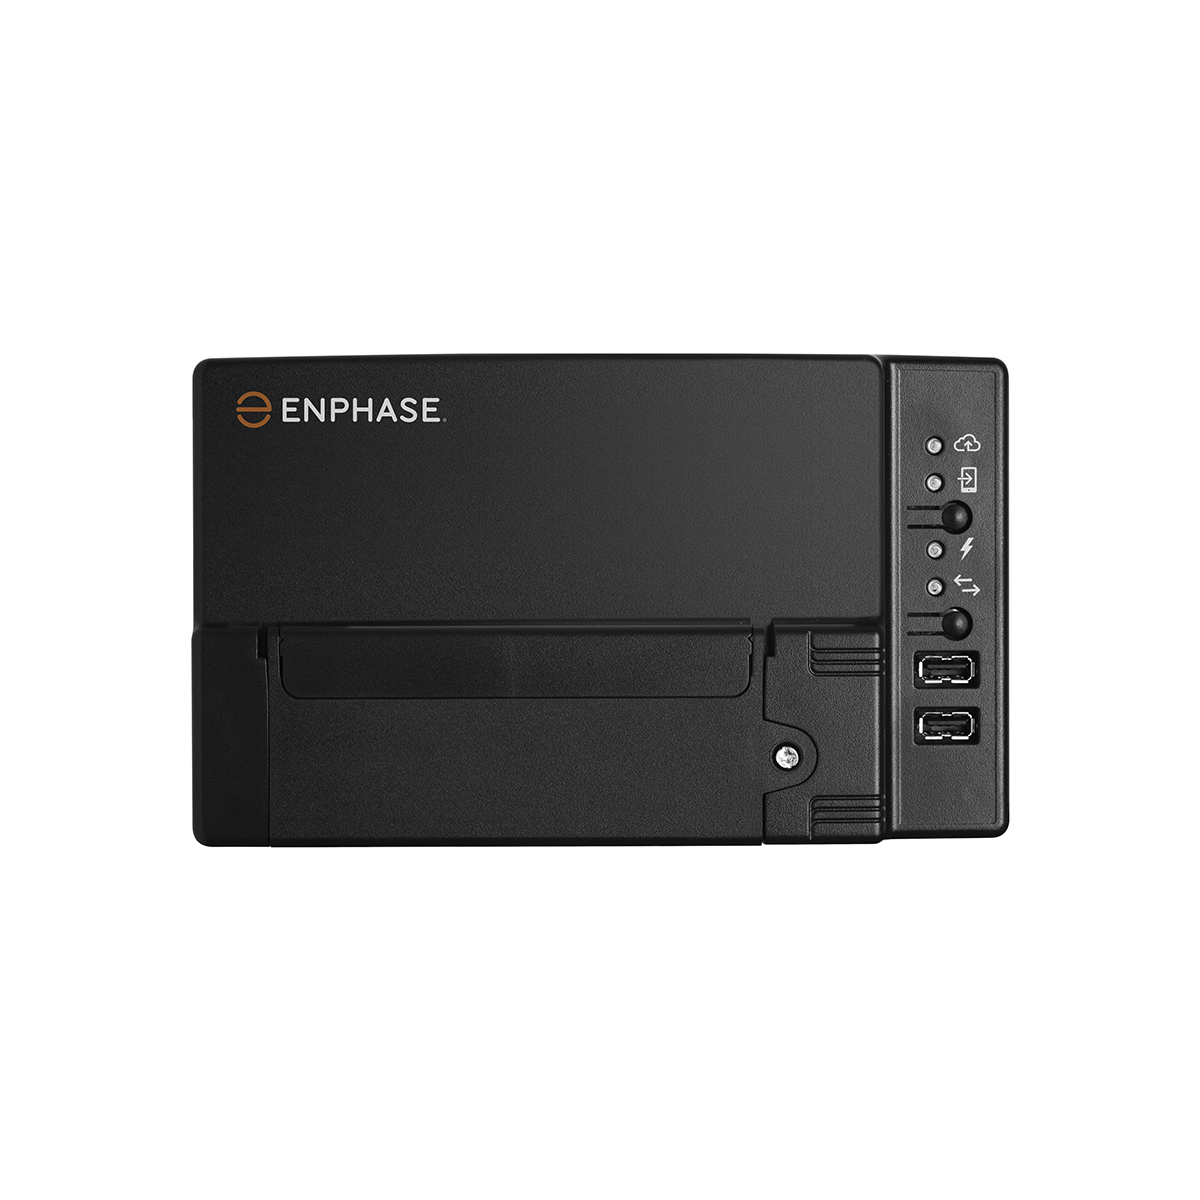 30x Sunpower P6 12150 wp met Enphase IQ8A en Accu 1x N Charge 10T,1 x N Charge 3T